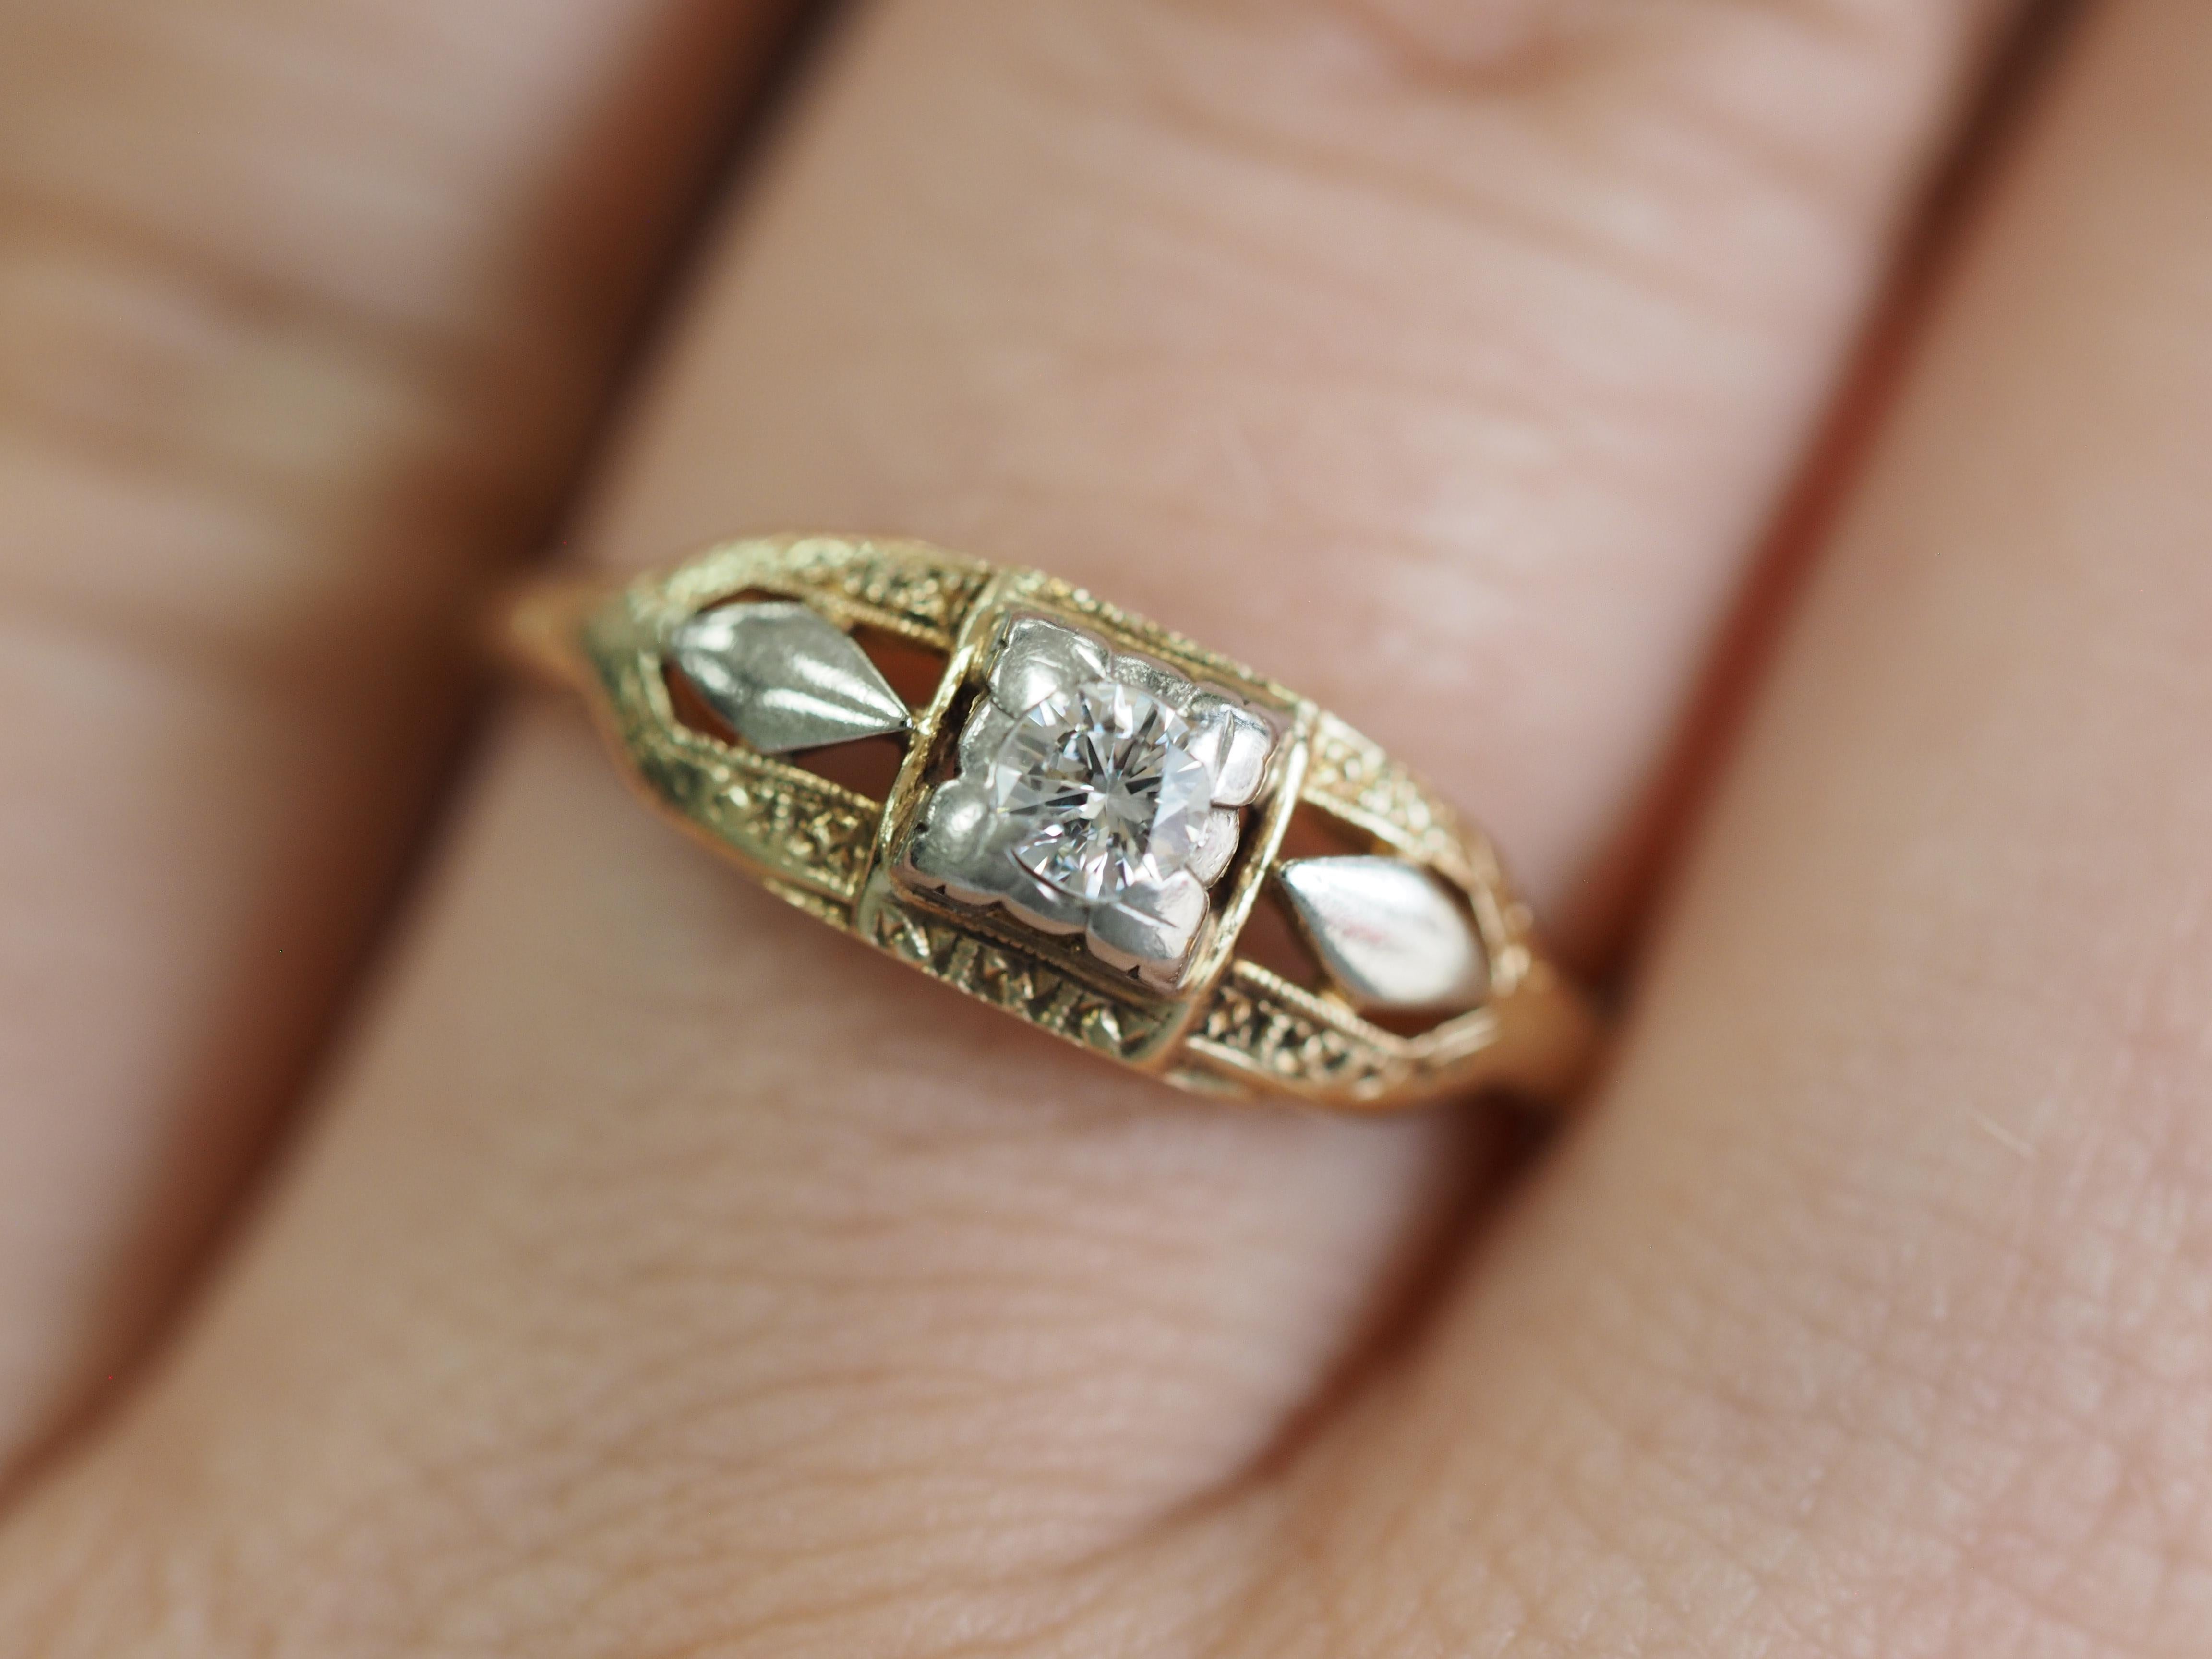 This Art Deco solitaire is a fine example of a filigree solitaire engagement ring crafted in 14 karat white & yellow gold. The 0.11 ct Single cut diamond is held high in four prongs showcasing the solitaire from all sides! The filigree design twists